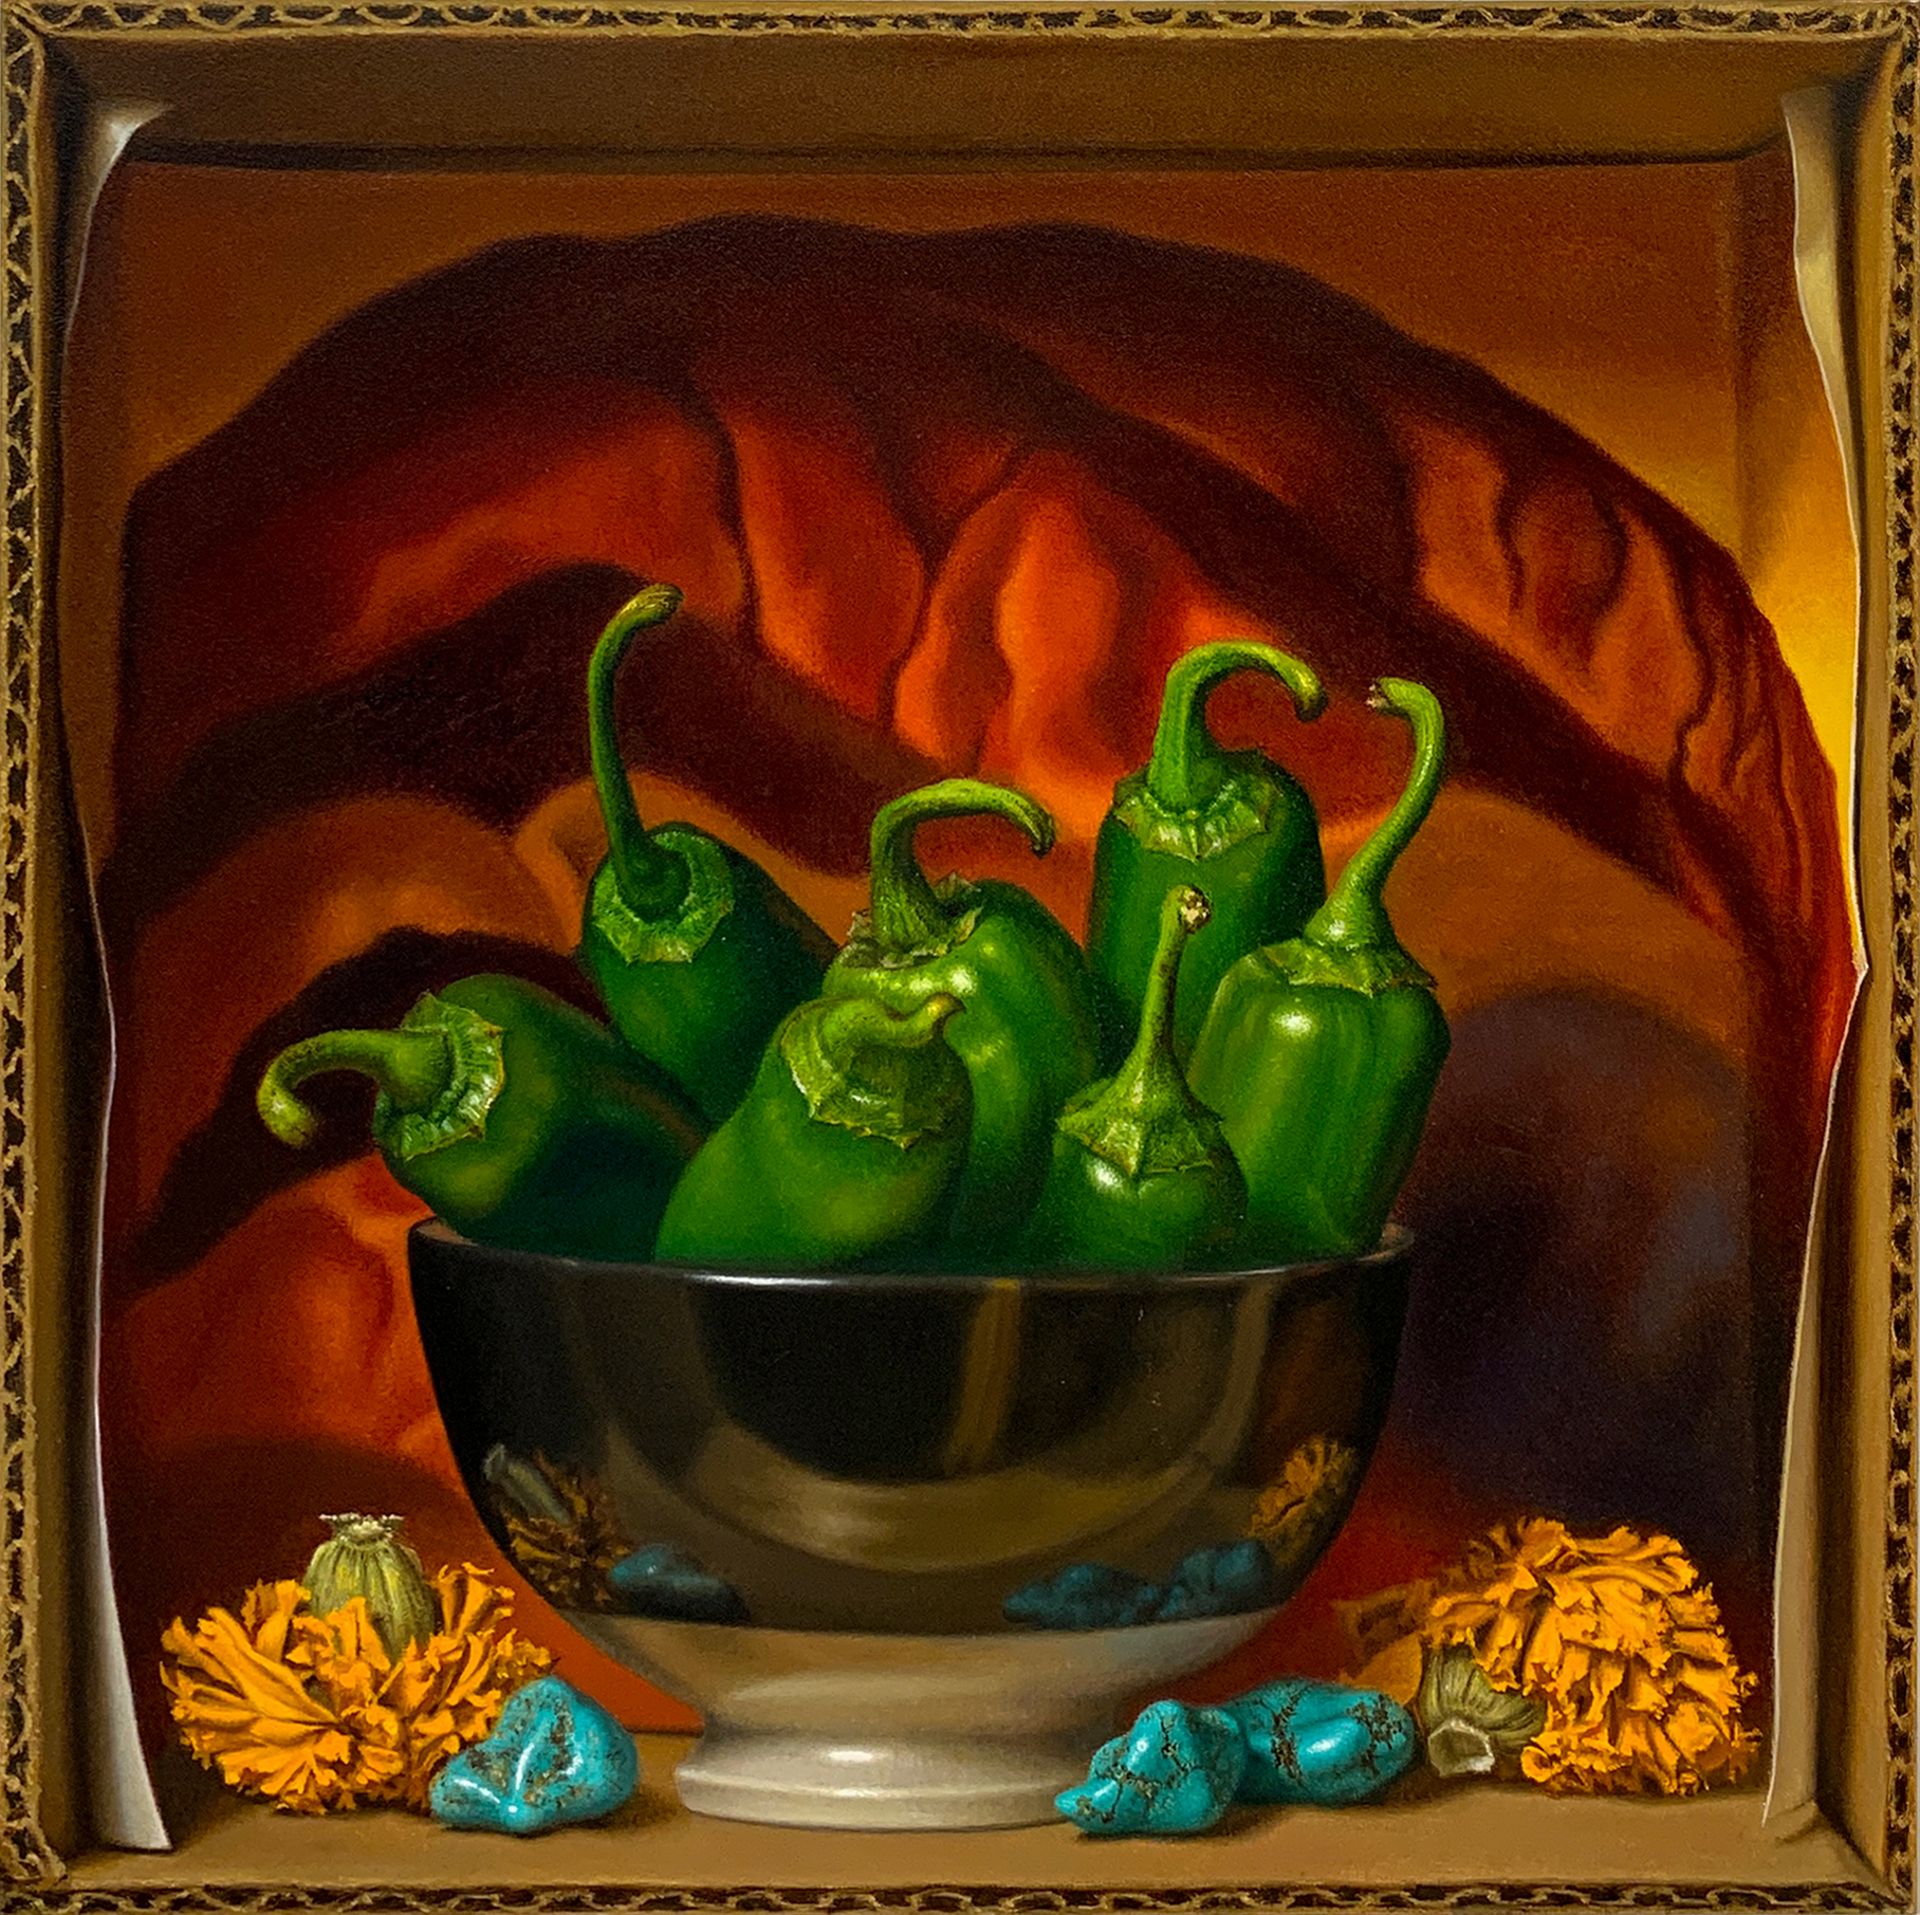 Jalapeno Peppers by Natalie Featherston